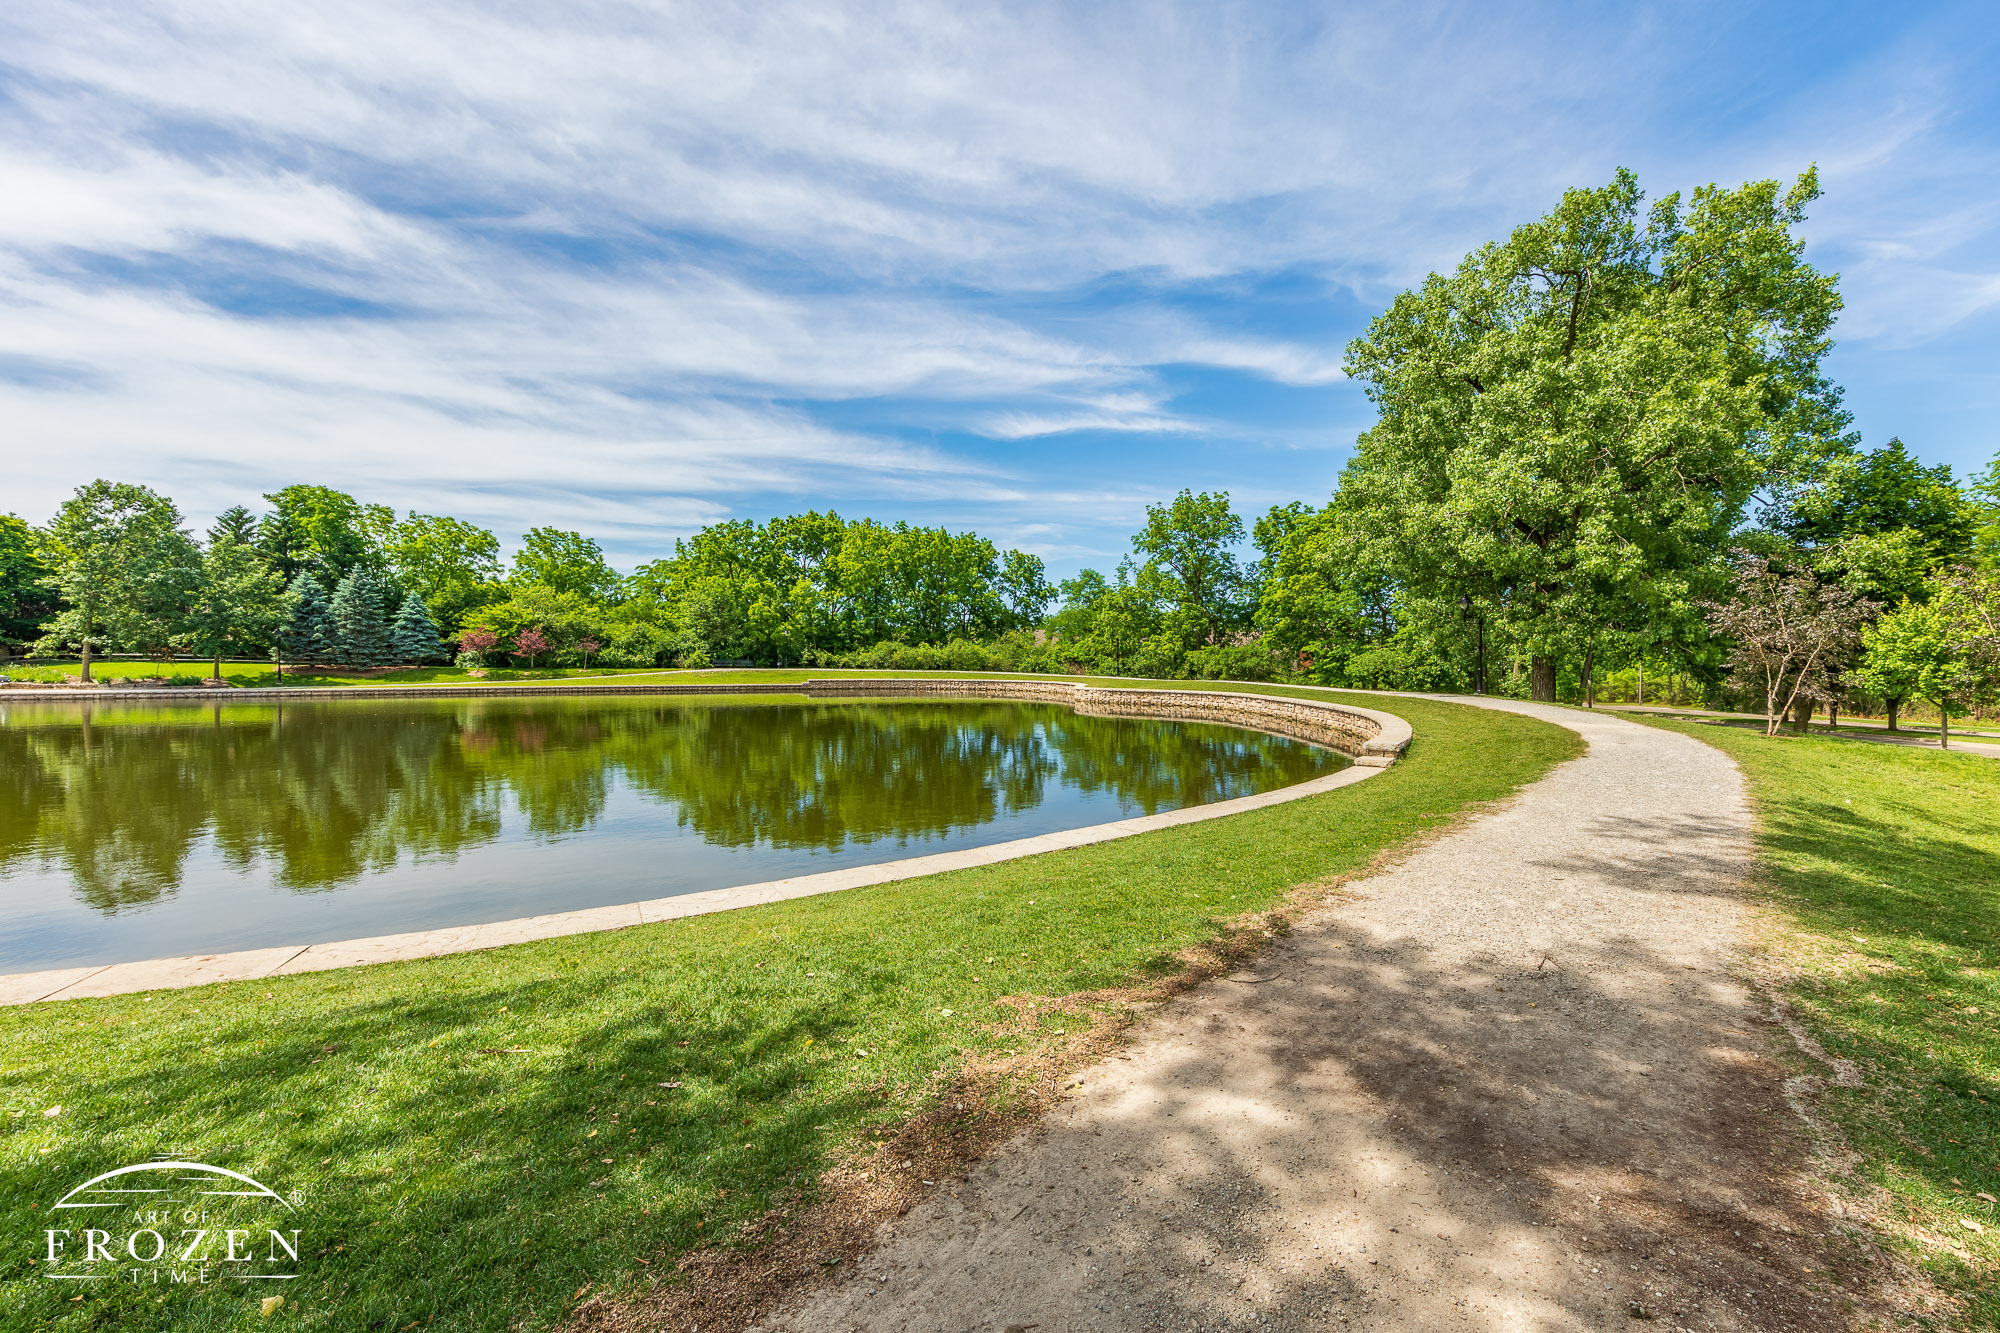 A walking path extends around a landscaped pond as cirrus clouds float overhead